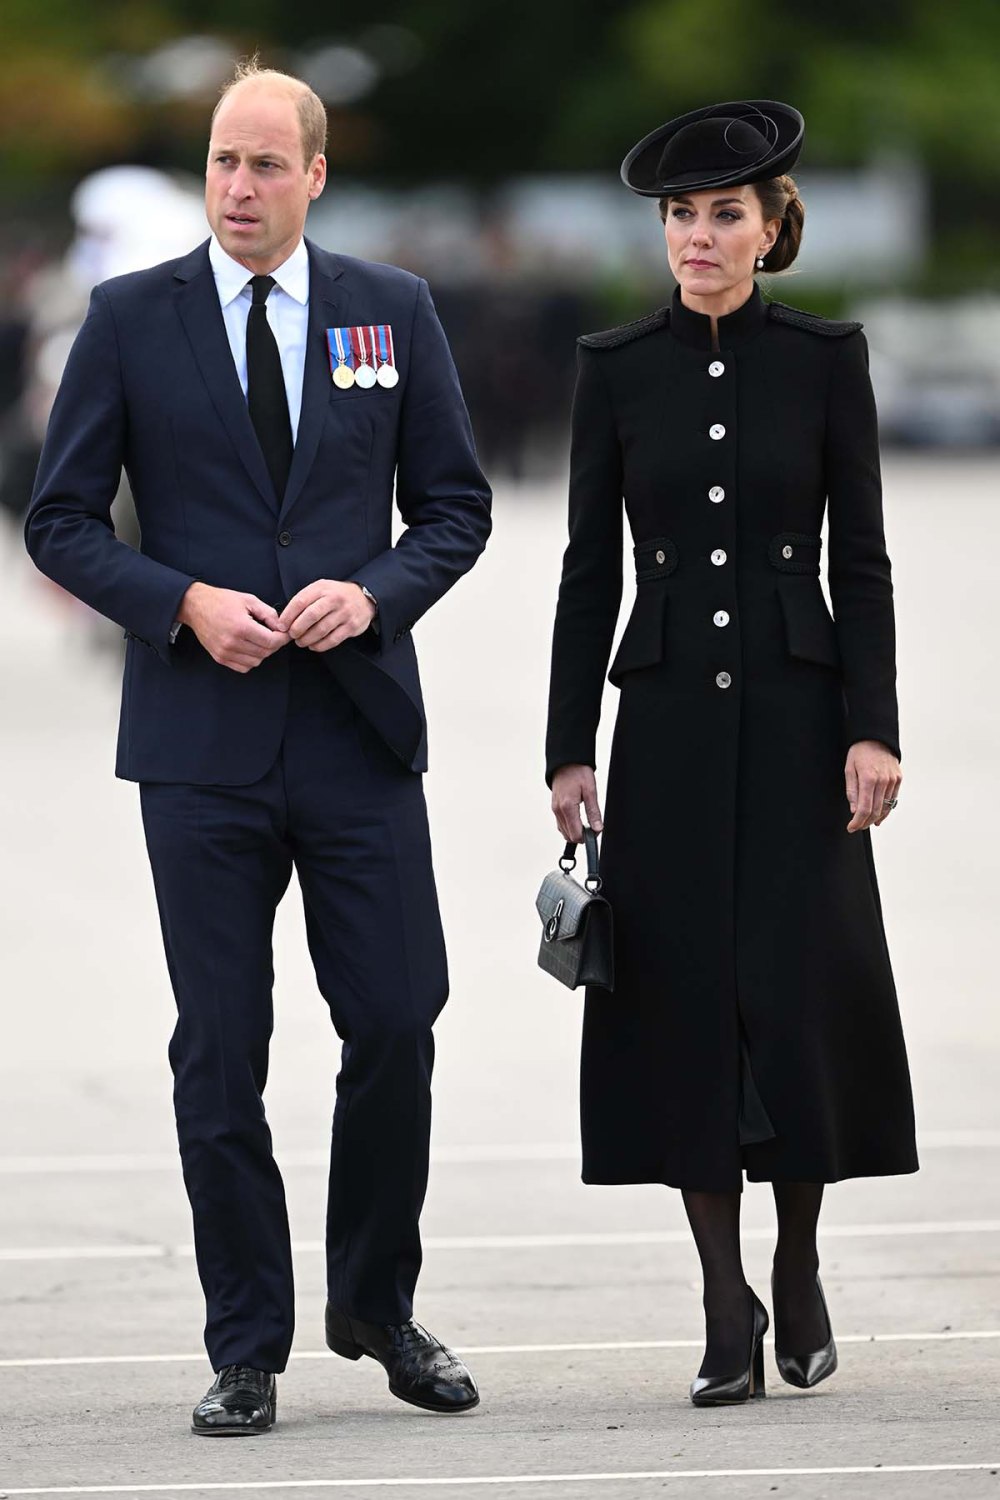 Prince William and Princess Kate Meet With Troops Deployed to Attend Queen Elizabeth II’s Funeral: